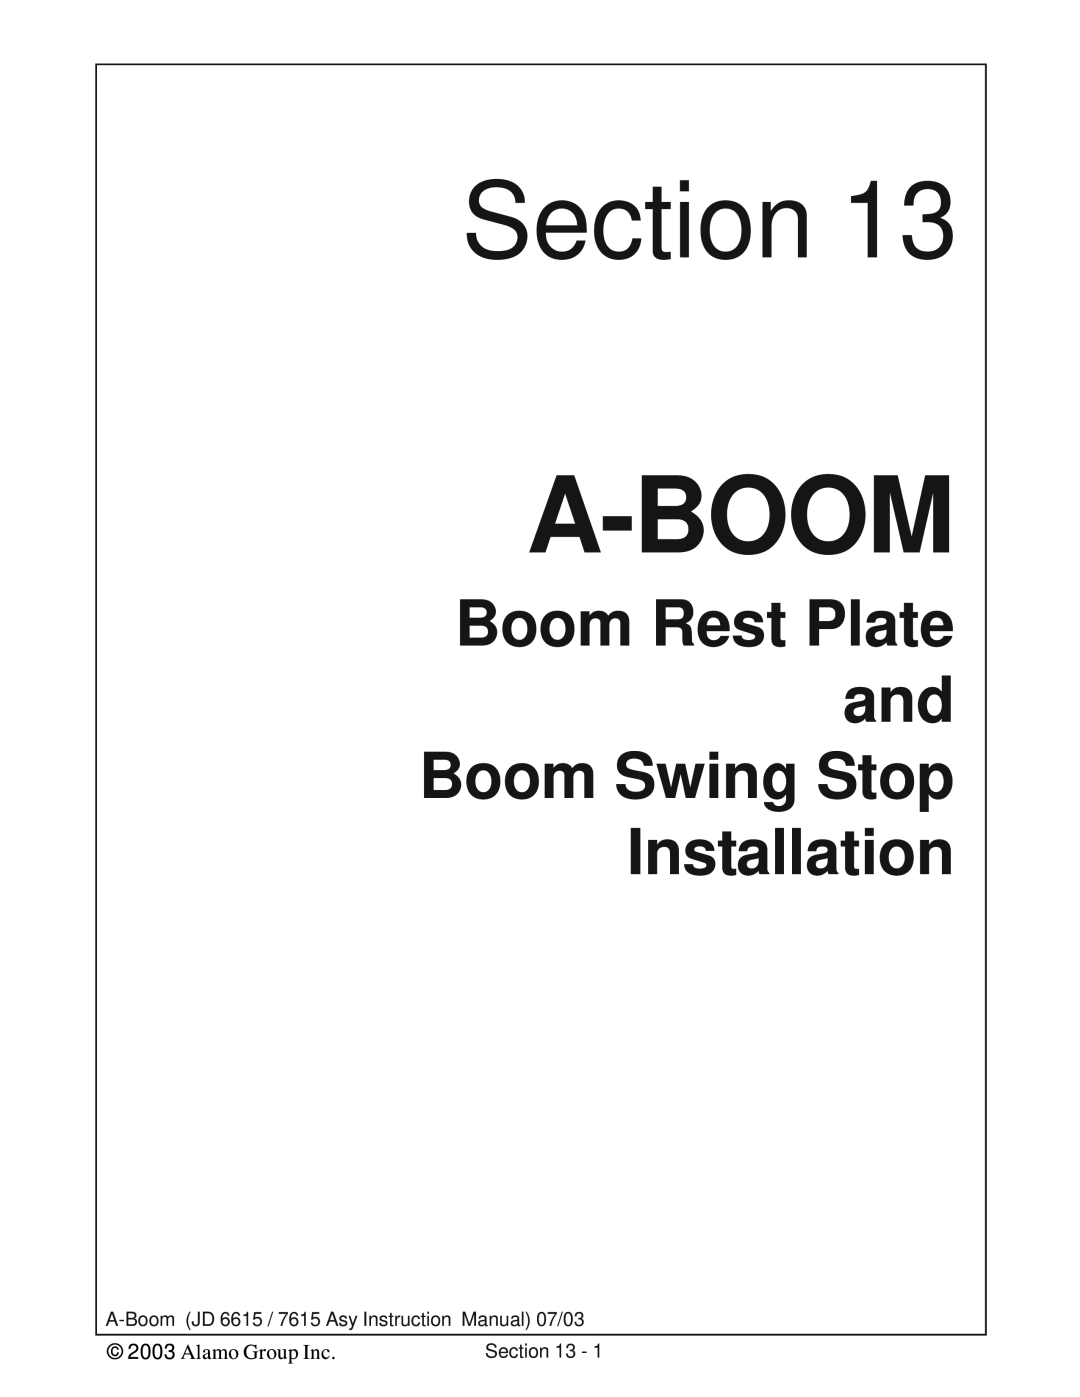 Alamo DSEB-D16/SAS instruction manual Boom Rest Plate and Boom Swing Stop Installation, Section, A-Boom, Alamo Group Inc 